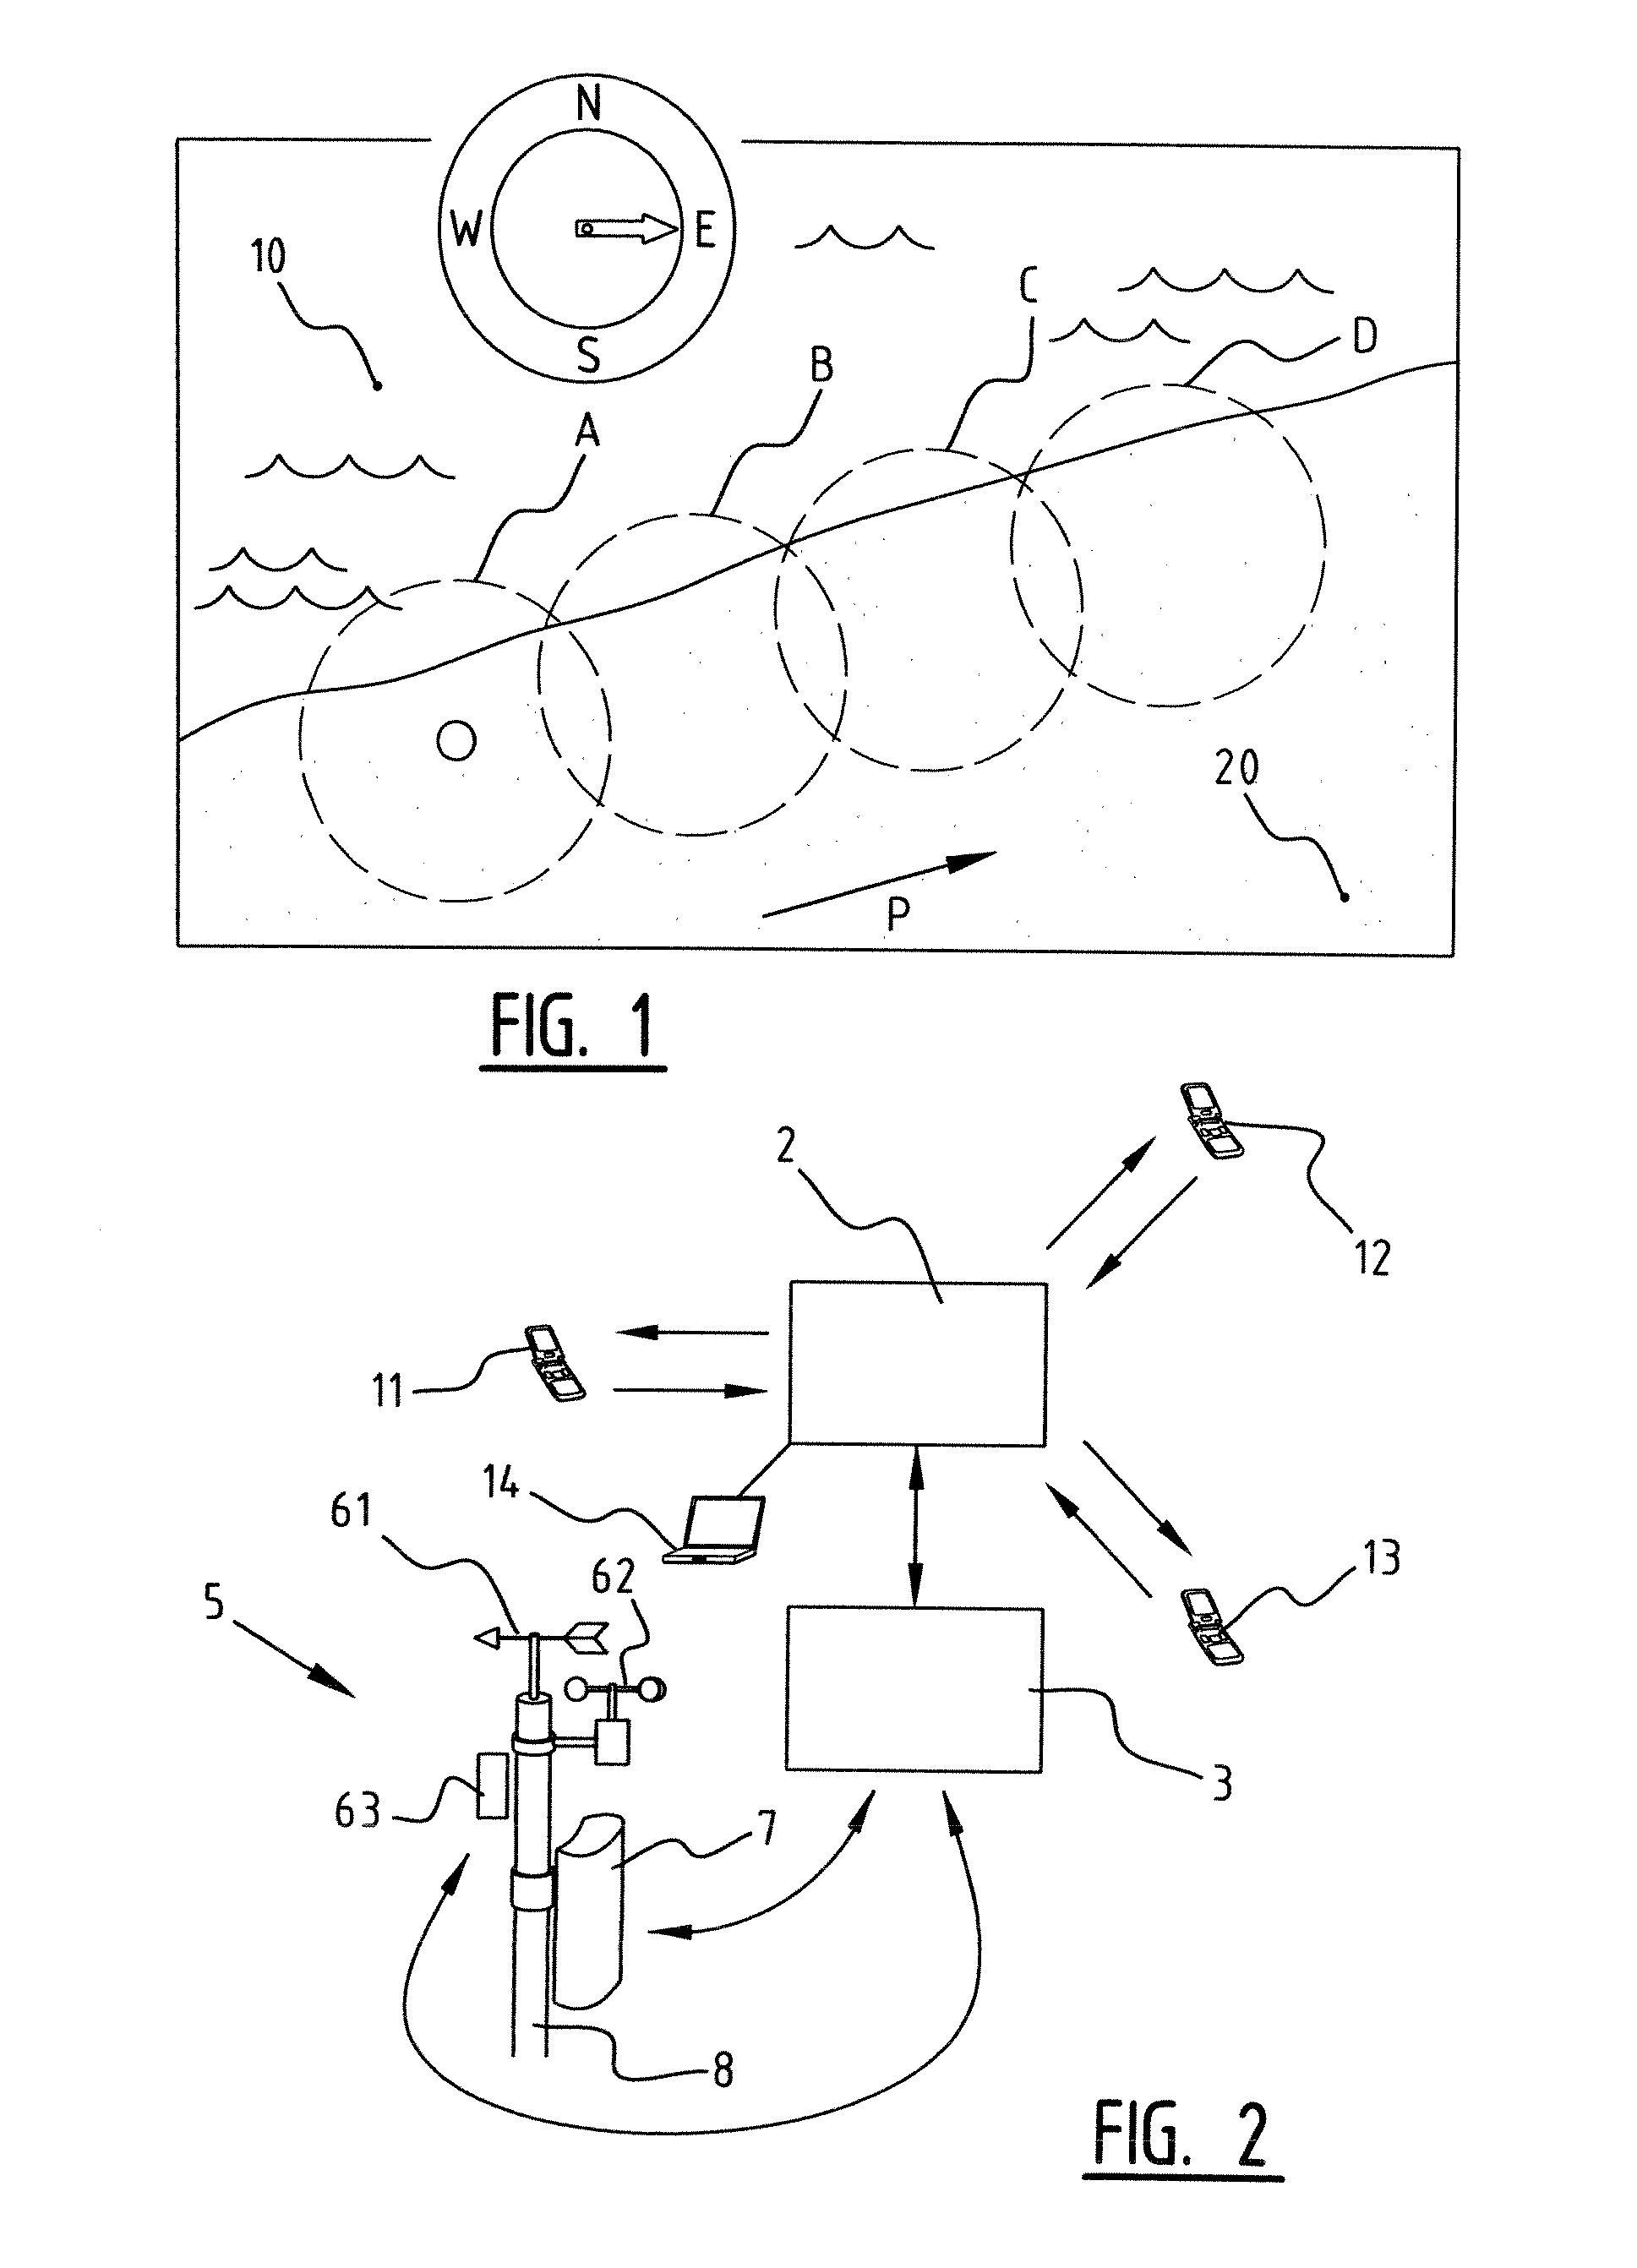 Method and system for retrieving a lost entity, and cell-based wireless network adapted therefore